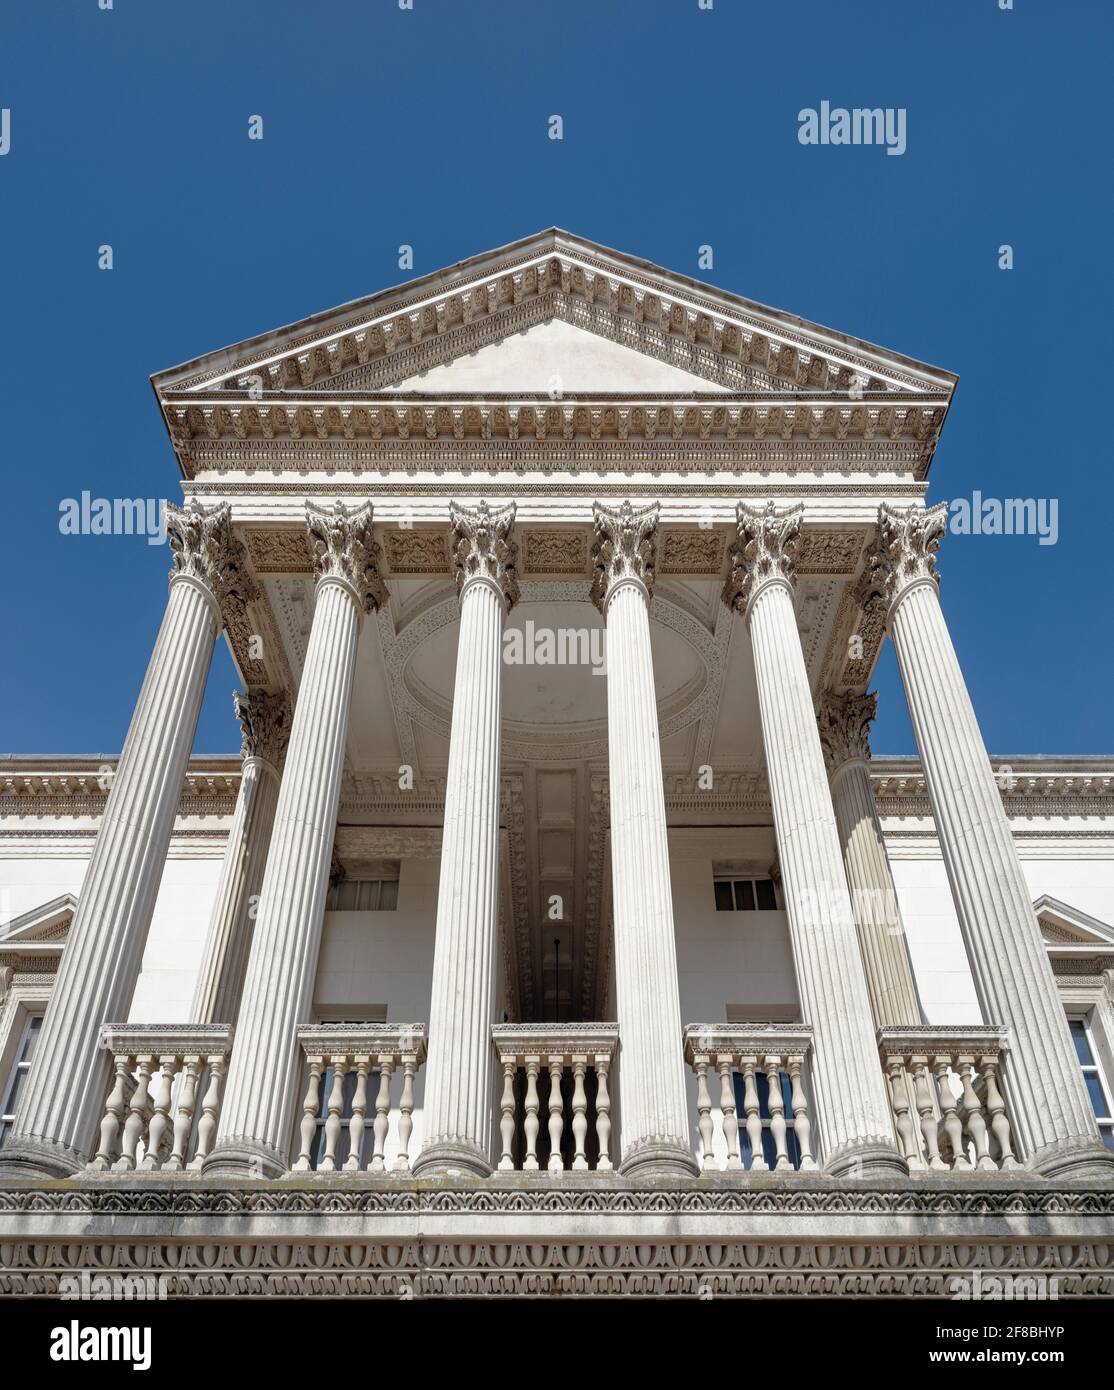 Chiswick House, 18th century Palladian Villa with Roman style columns and balcony. Stock Photo